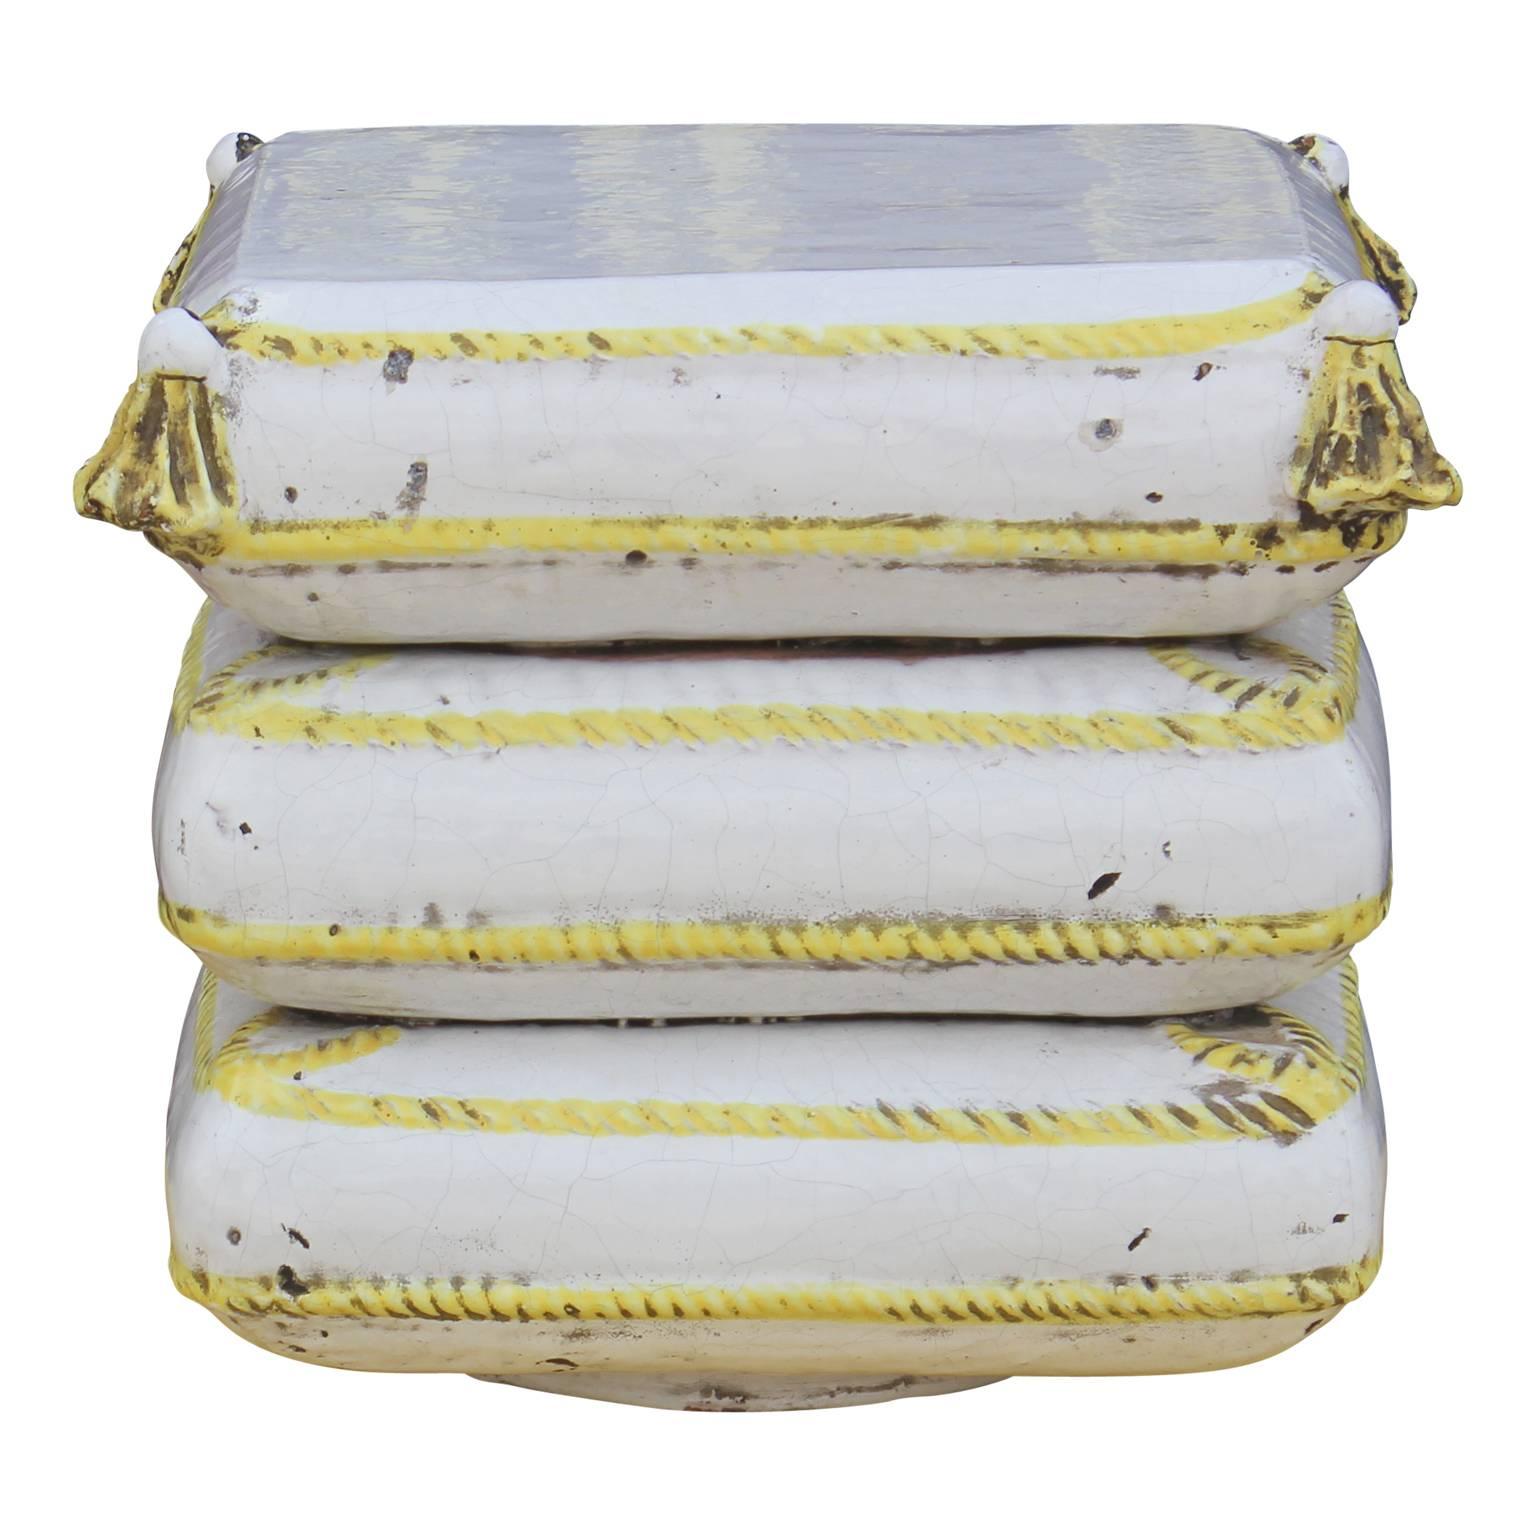 Unique pair of Italian ceramic garden stools in the form of three stacked square cushions with yellow trim and tassels. Perfect addition to any garden in need of something unique. 